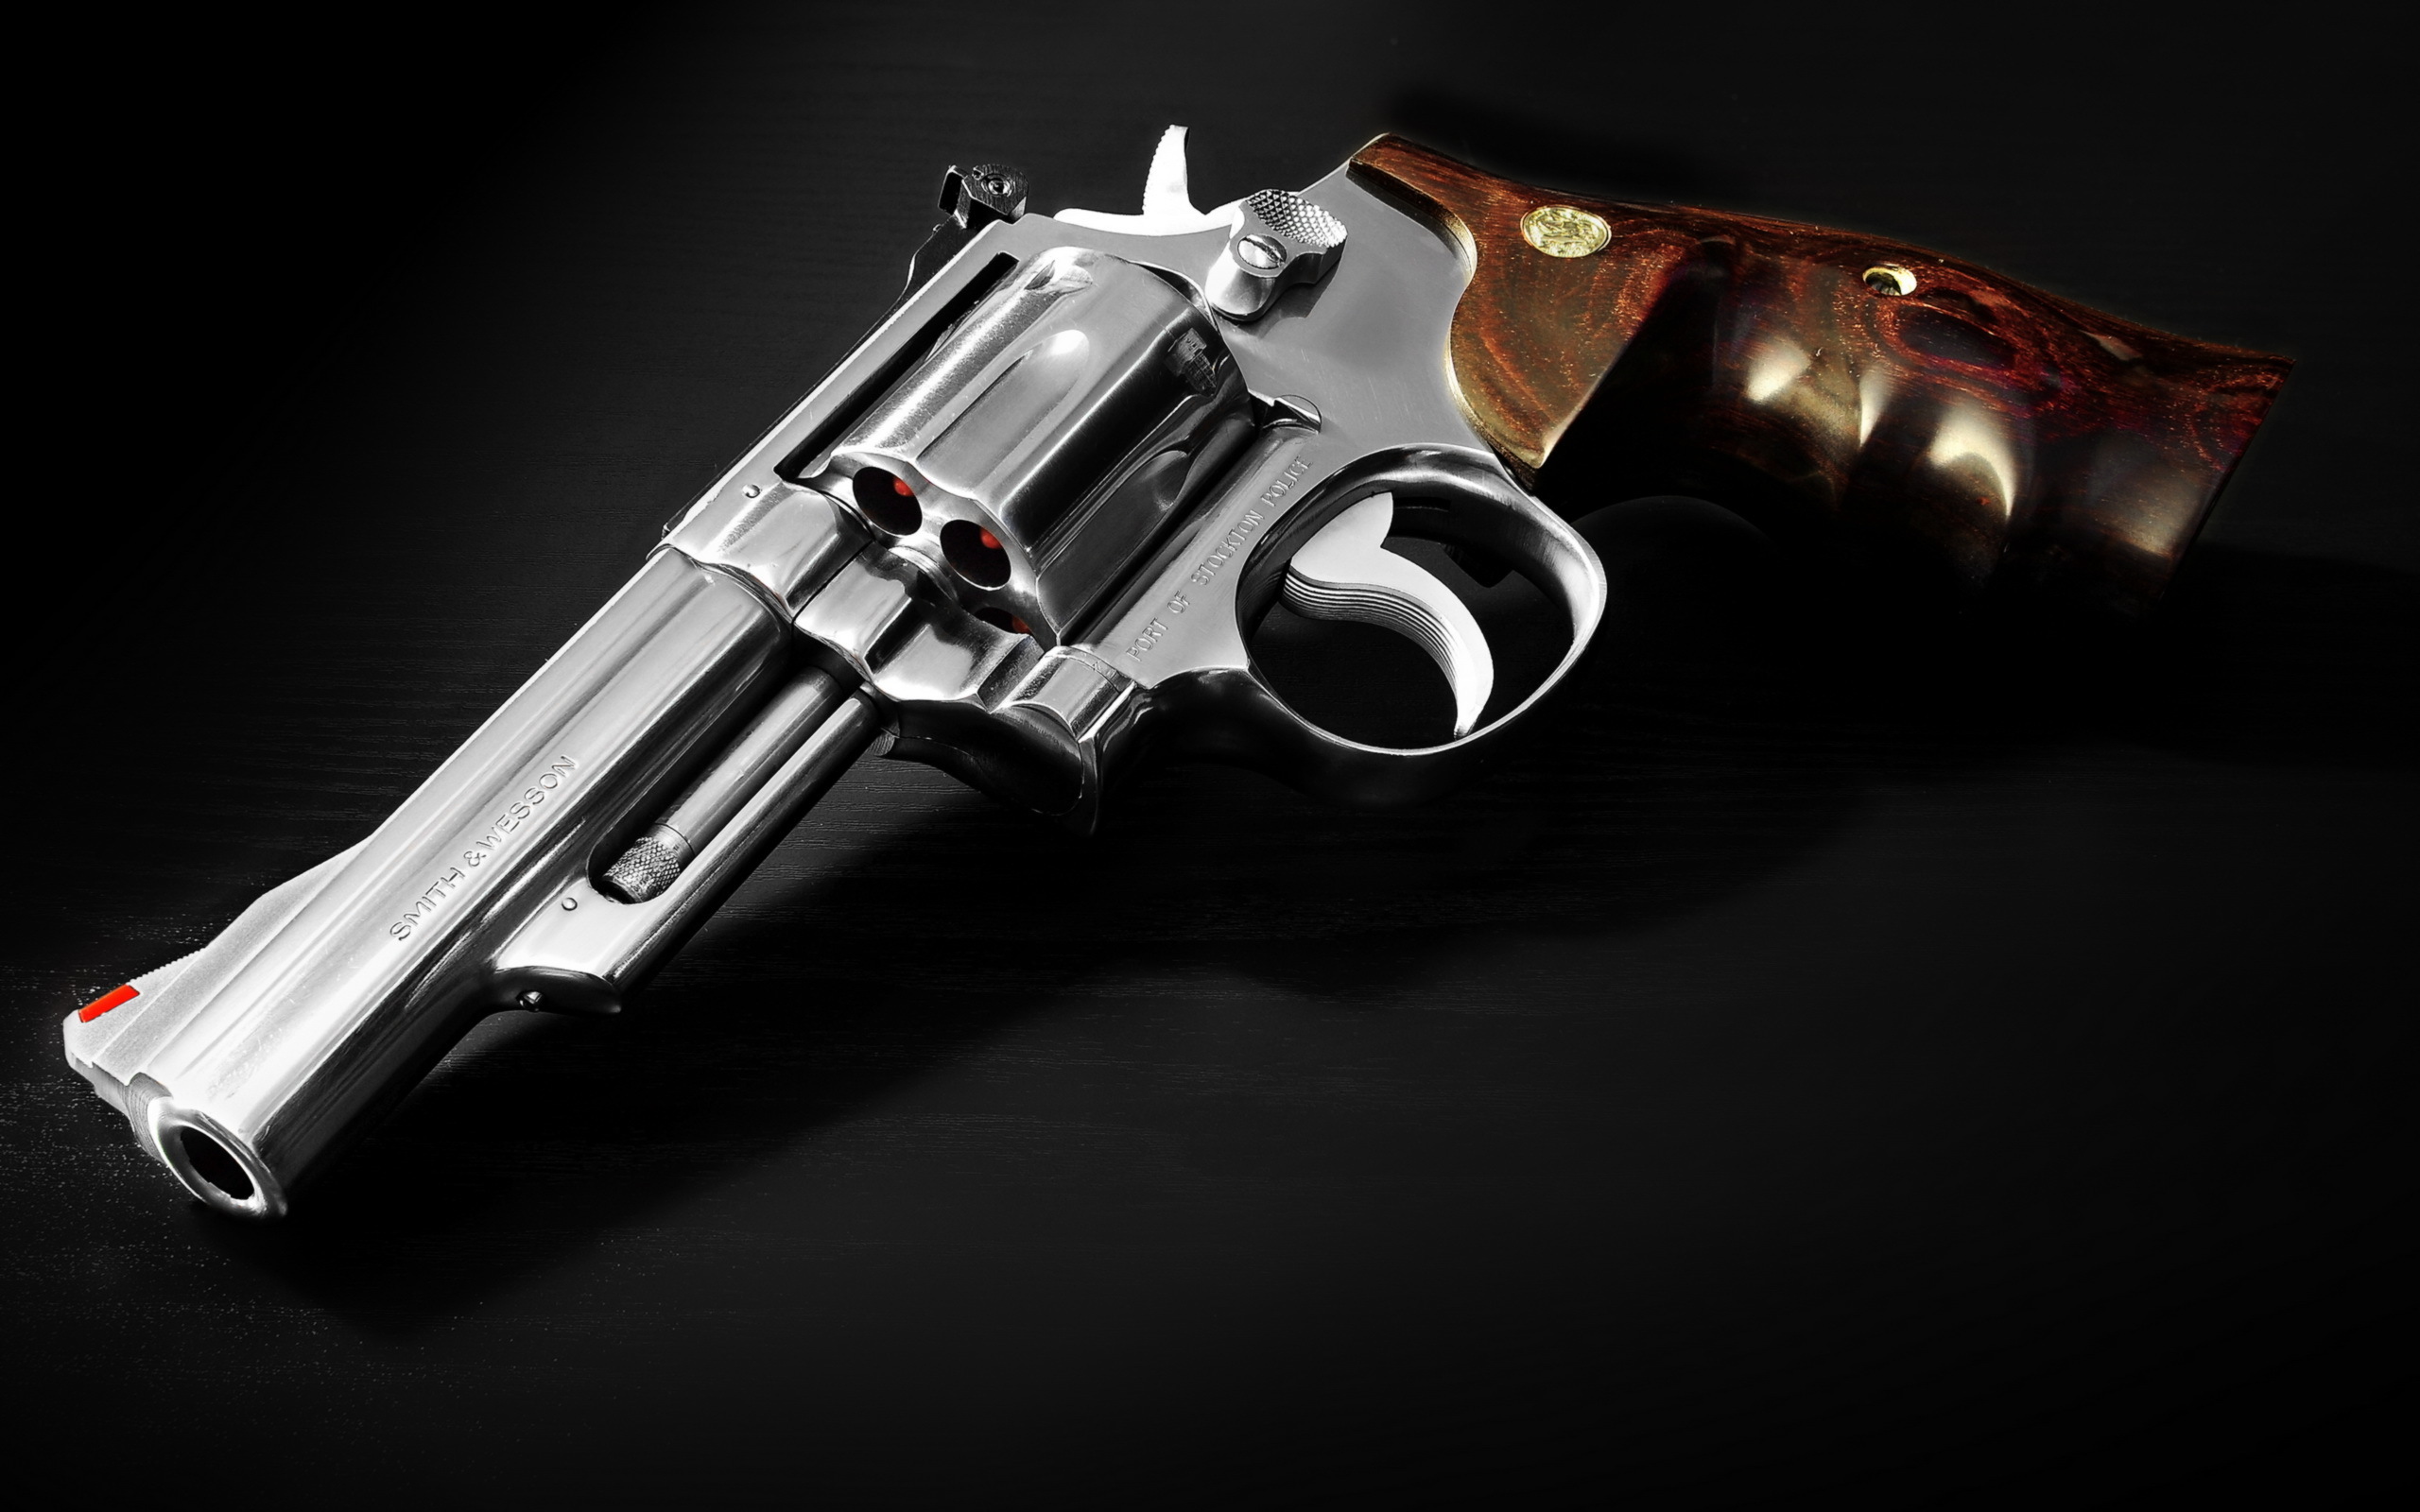 Smith and Wesson 66 1 Computer Wallpapers Desktop Backgrounds 2560x1600